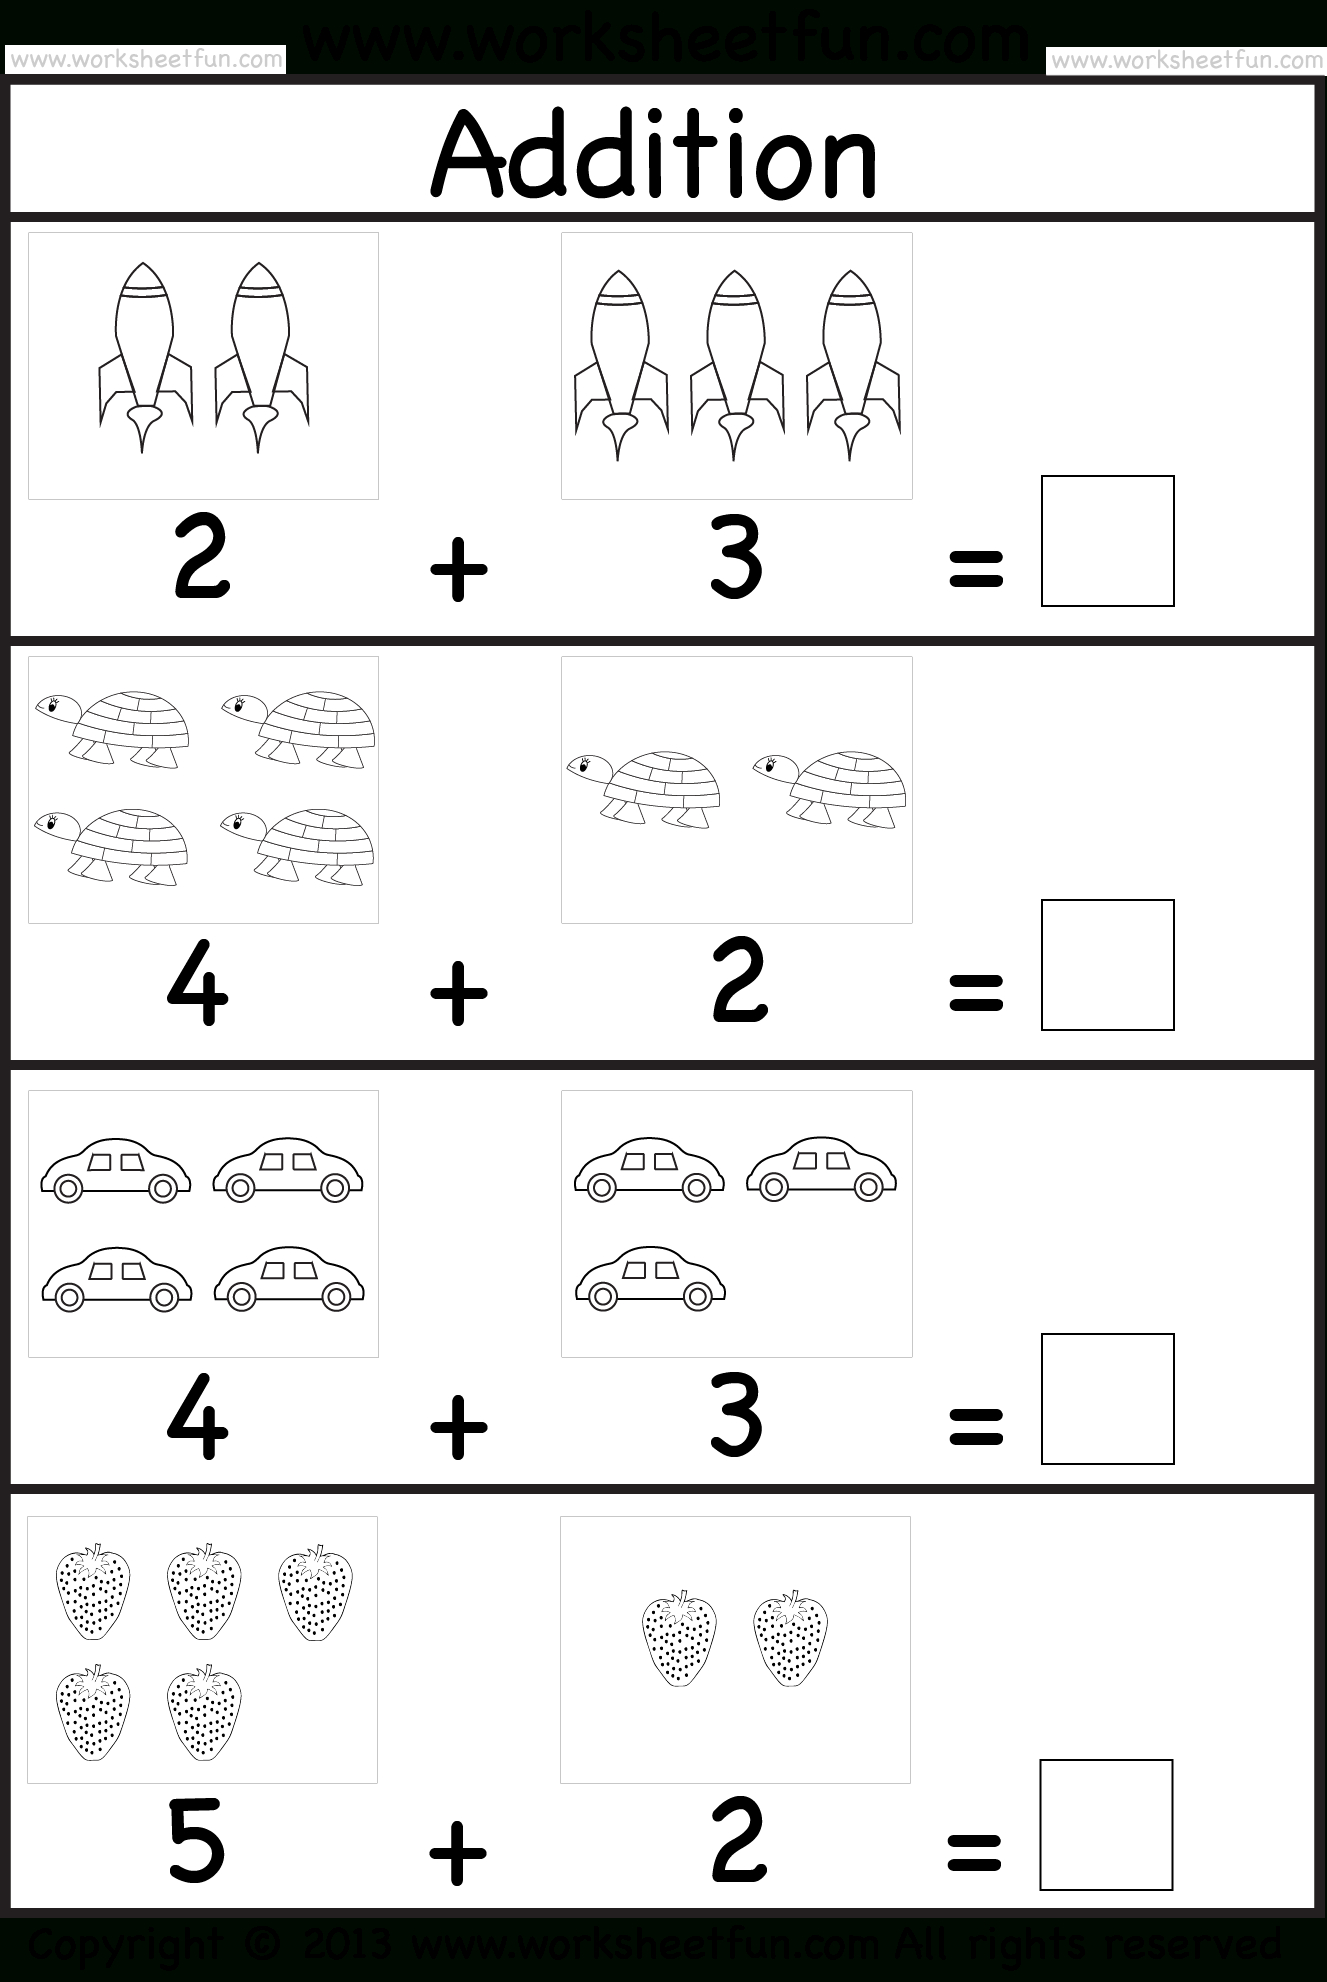 Addition Worksheet. This Site Has Great Free Worksheets For - Free Printable Math Addition Worksheets For Kindergarten